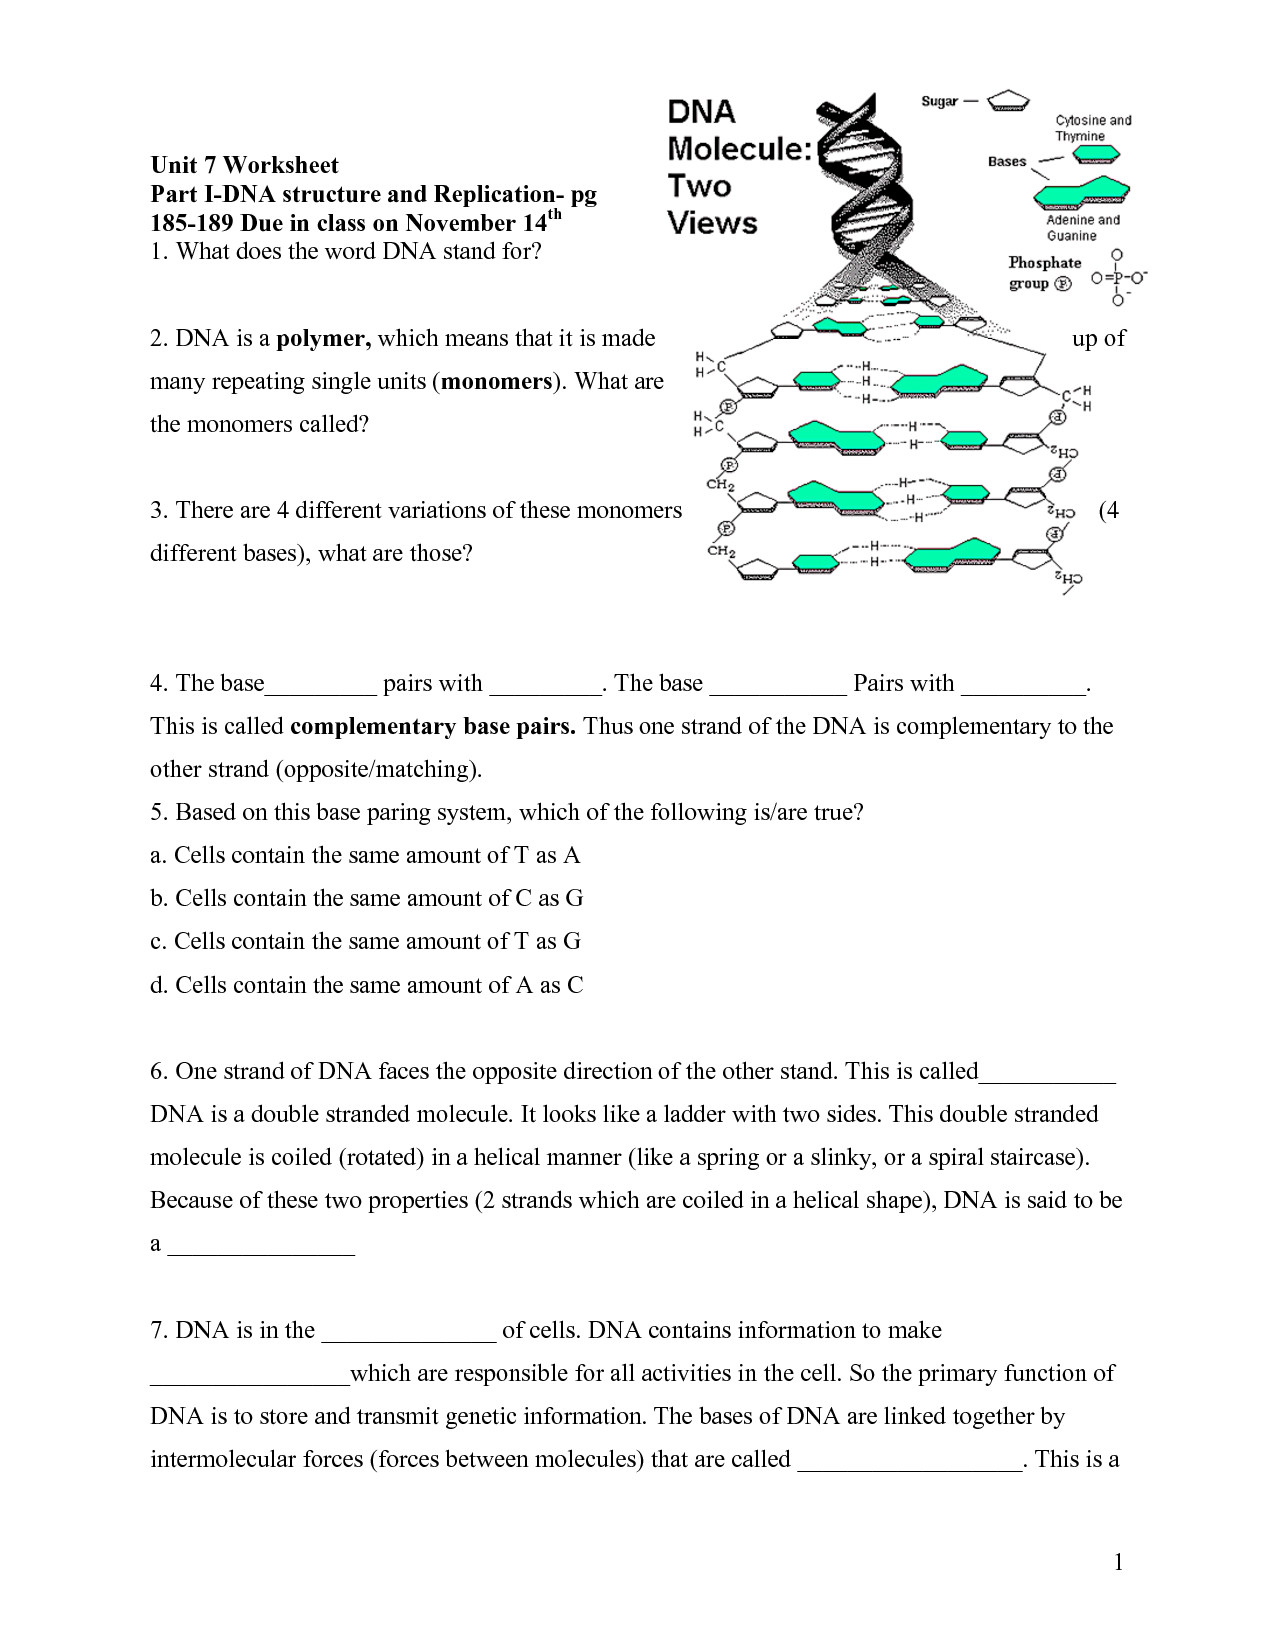 19-best-images-of-dna-replication-structure-worksheet-and-answers-dna-structure-worksheet